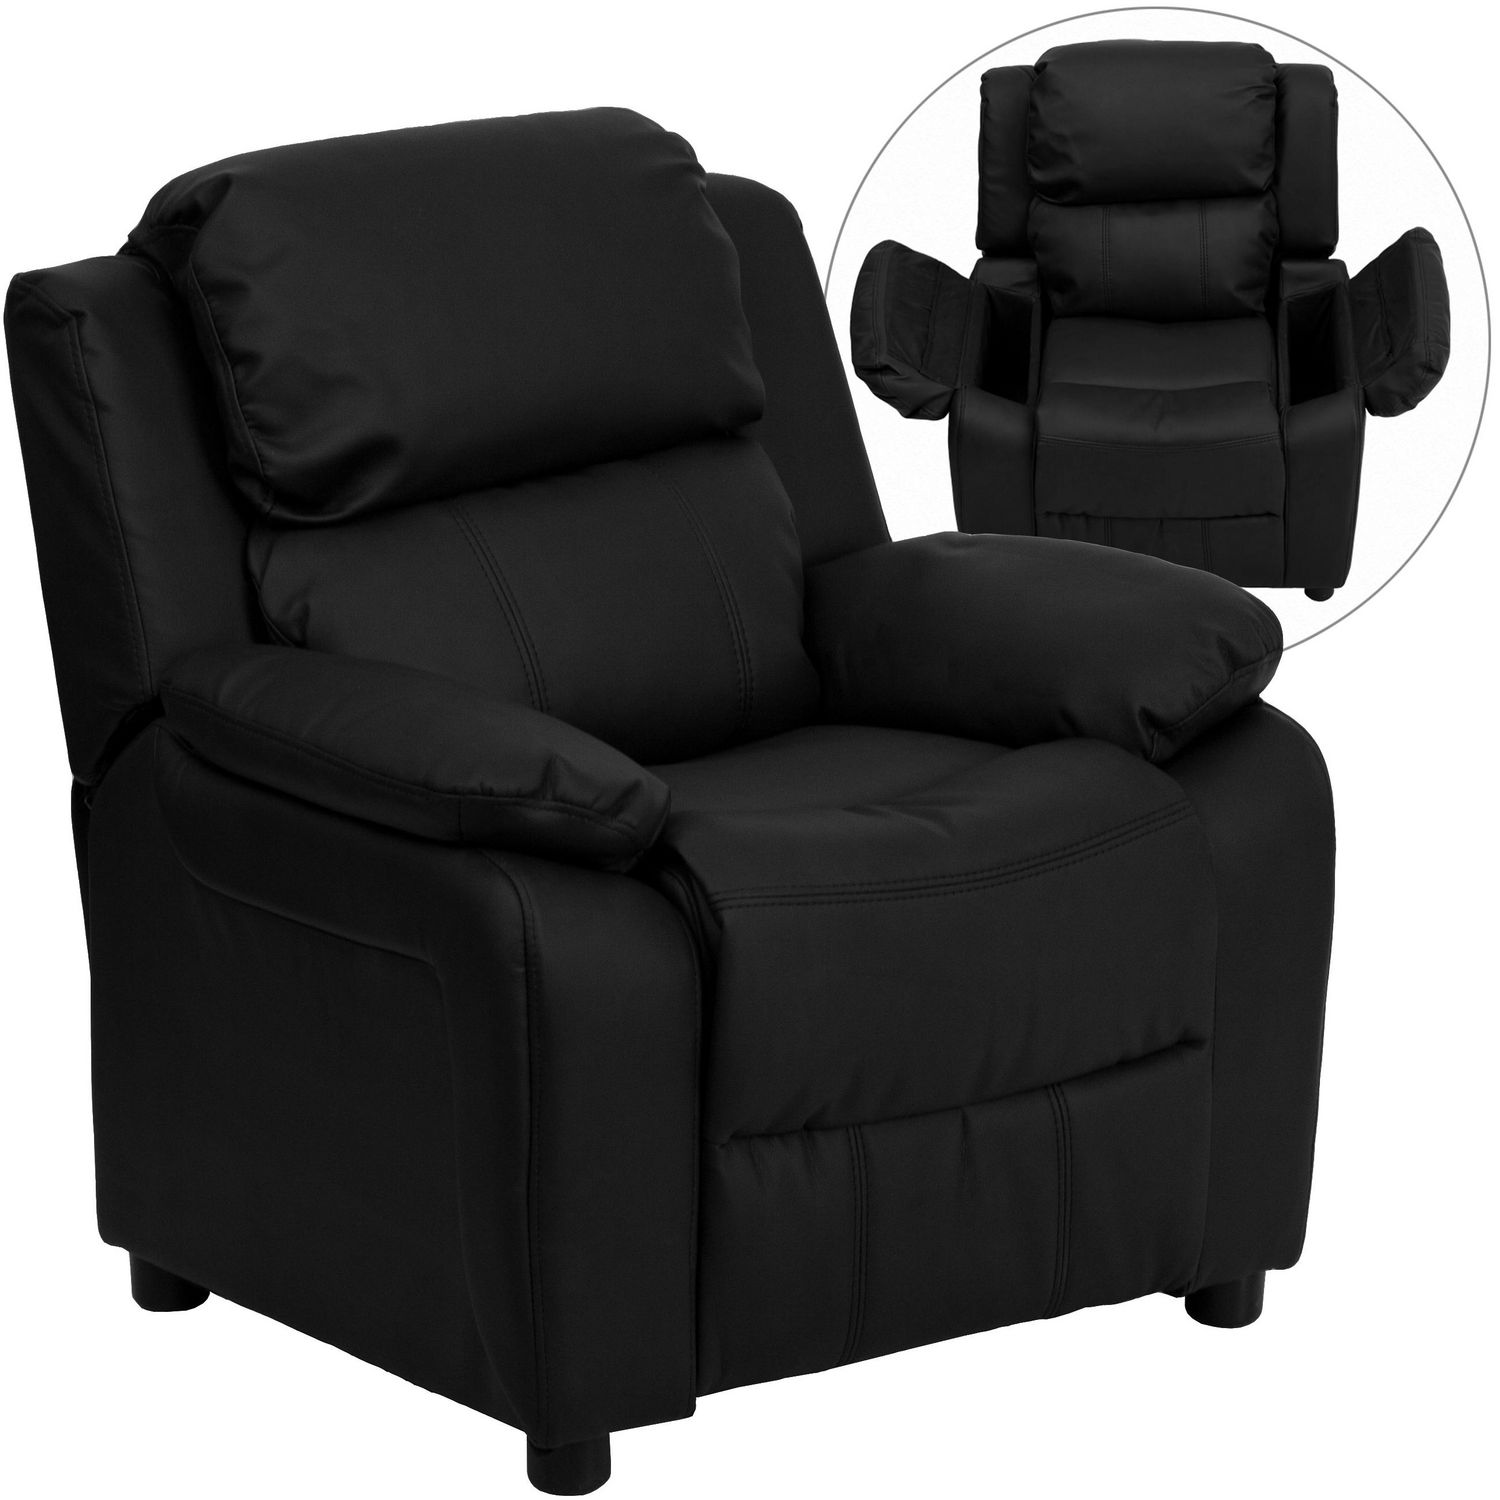 Deluxe Padded Contemporary Black Leather Kids Recliner With Storage Arms Walmart Canada